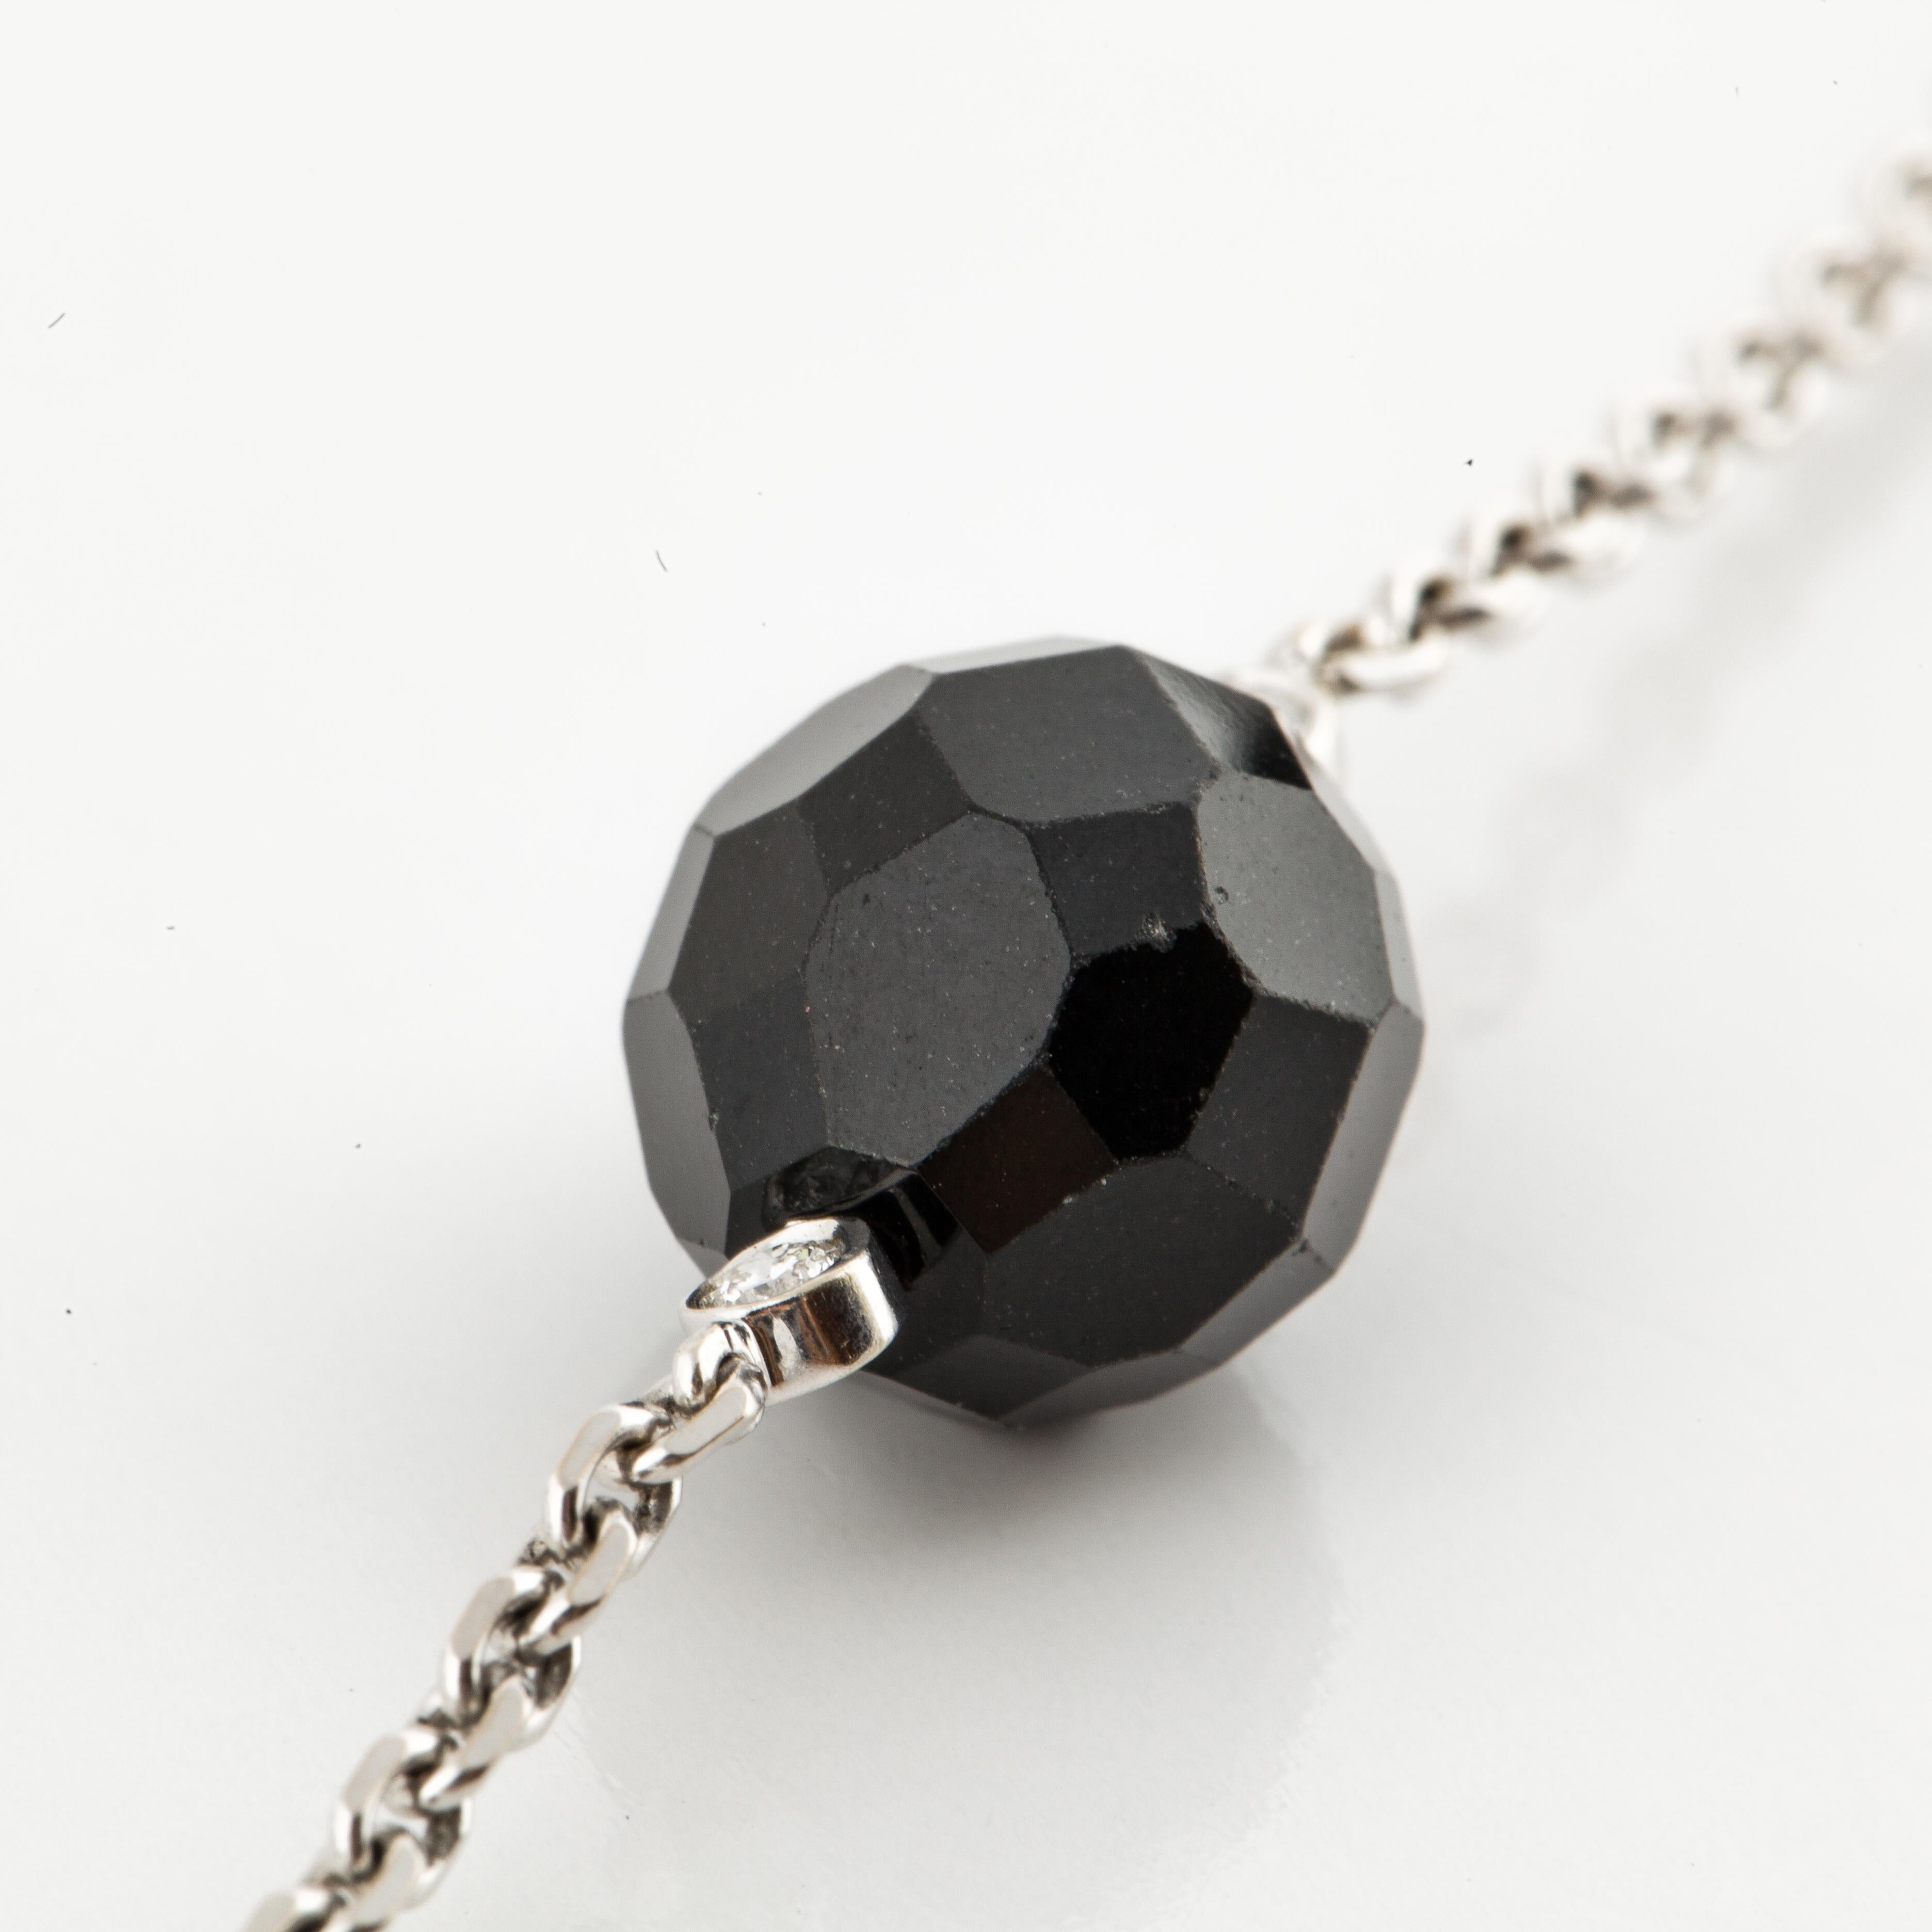 18K white gold chain necklace in a bead by the yard style, interspersed with faceted onyx beads and bezel set diamonds.  Measures 33 inches in length long and the beads are 7/16 inches across.